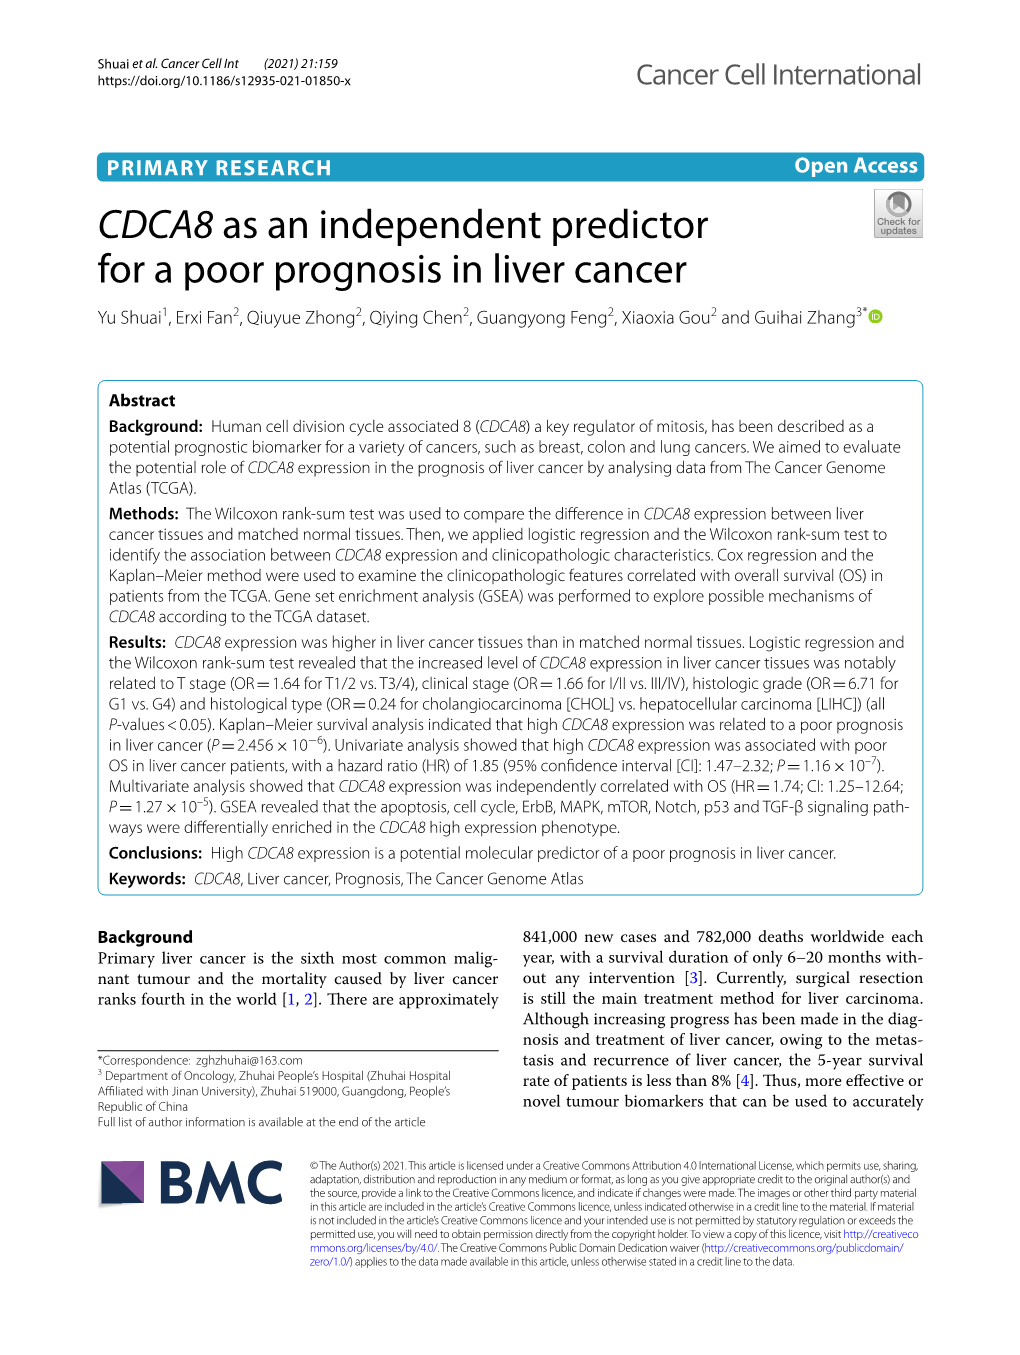 CDCA8 As an Independent Predictor for a Poor Prognosis in Liver Cancer